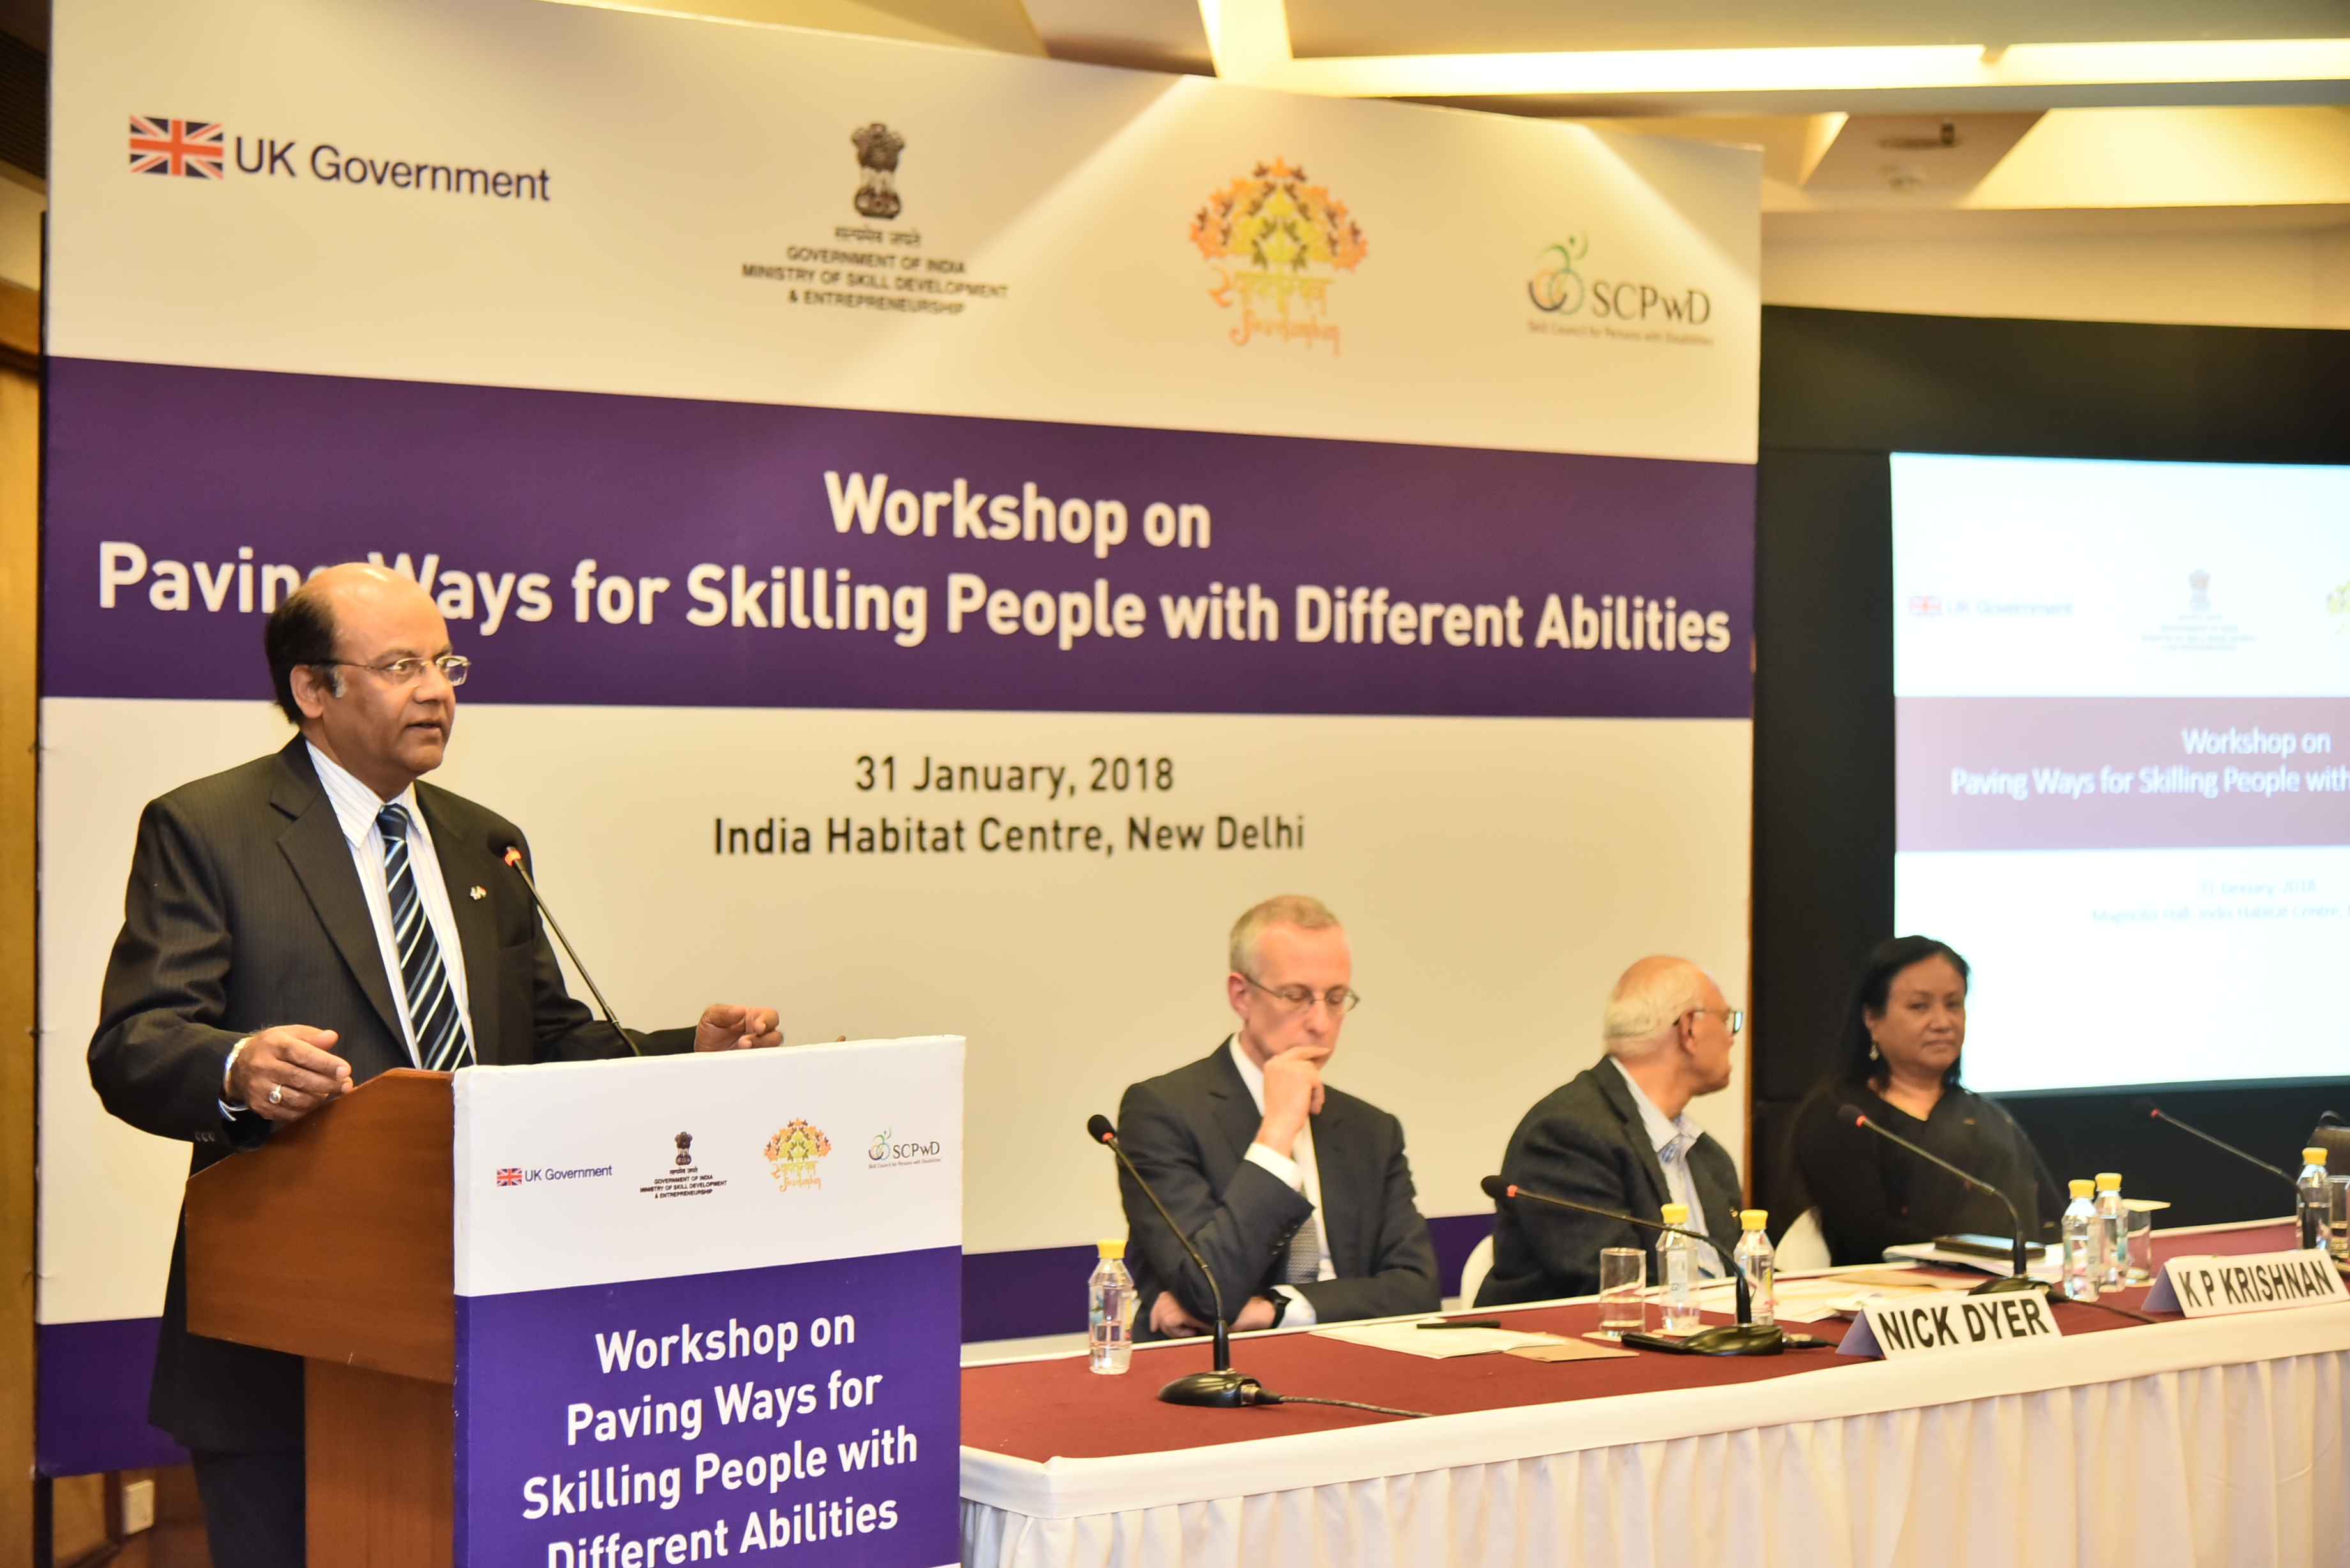 Workshop: Paving ways for skilling ‘People with Different Abilities’ 31st Jan'18